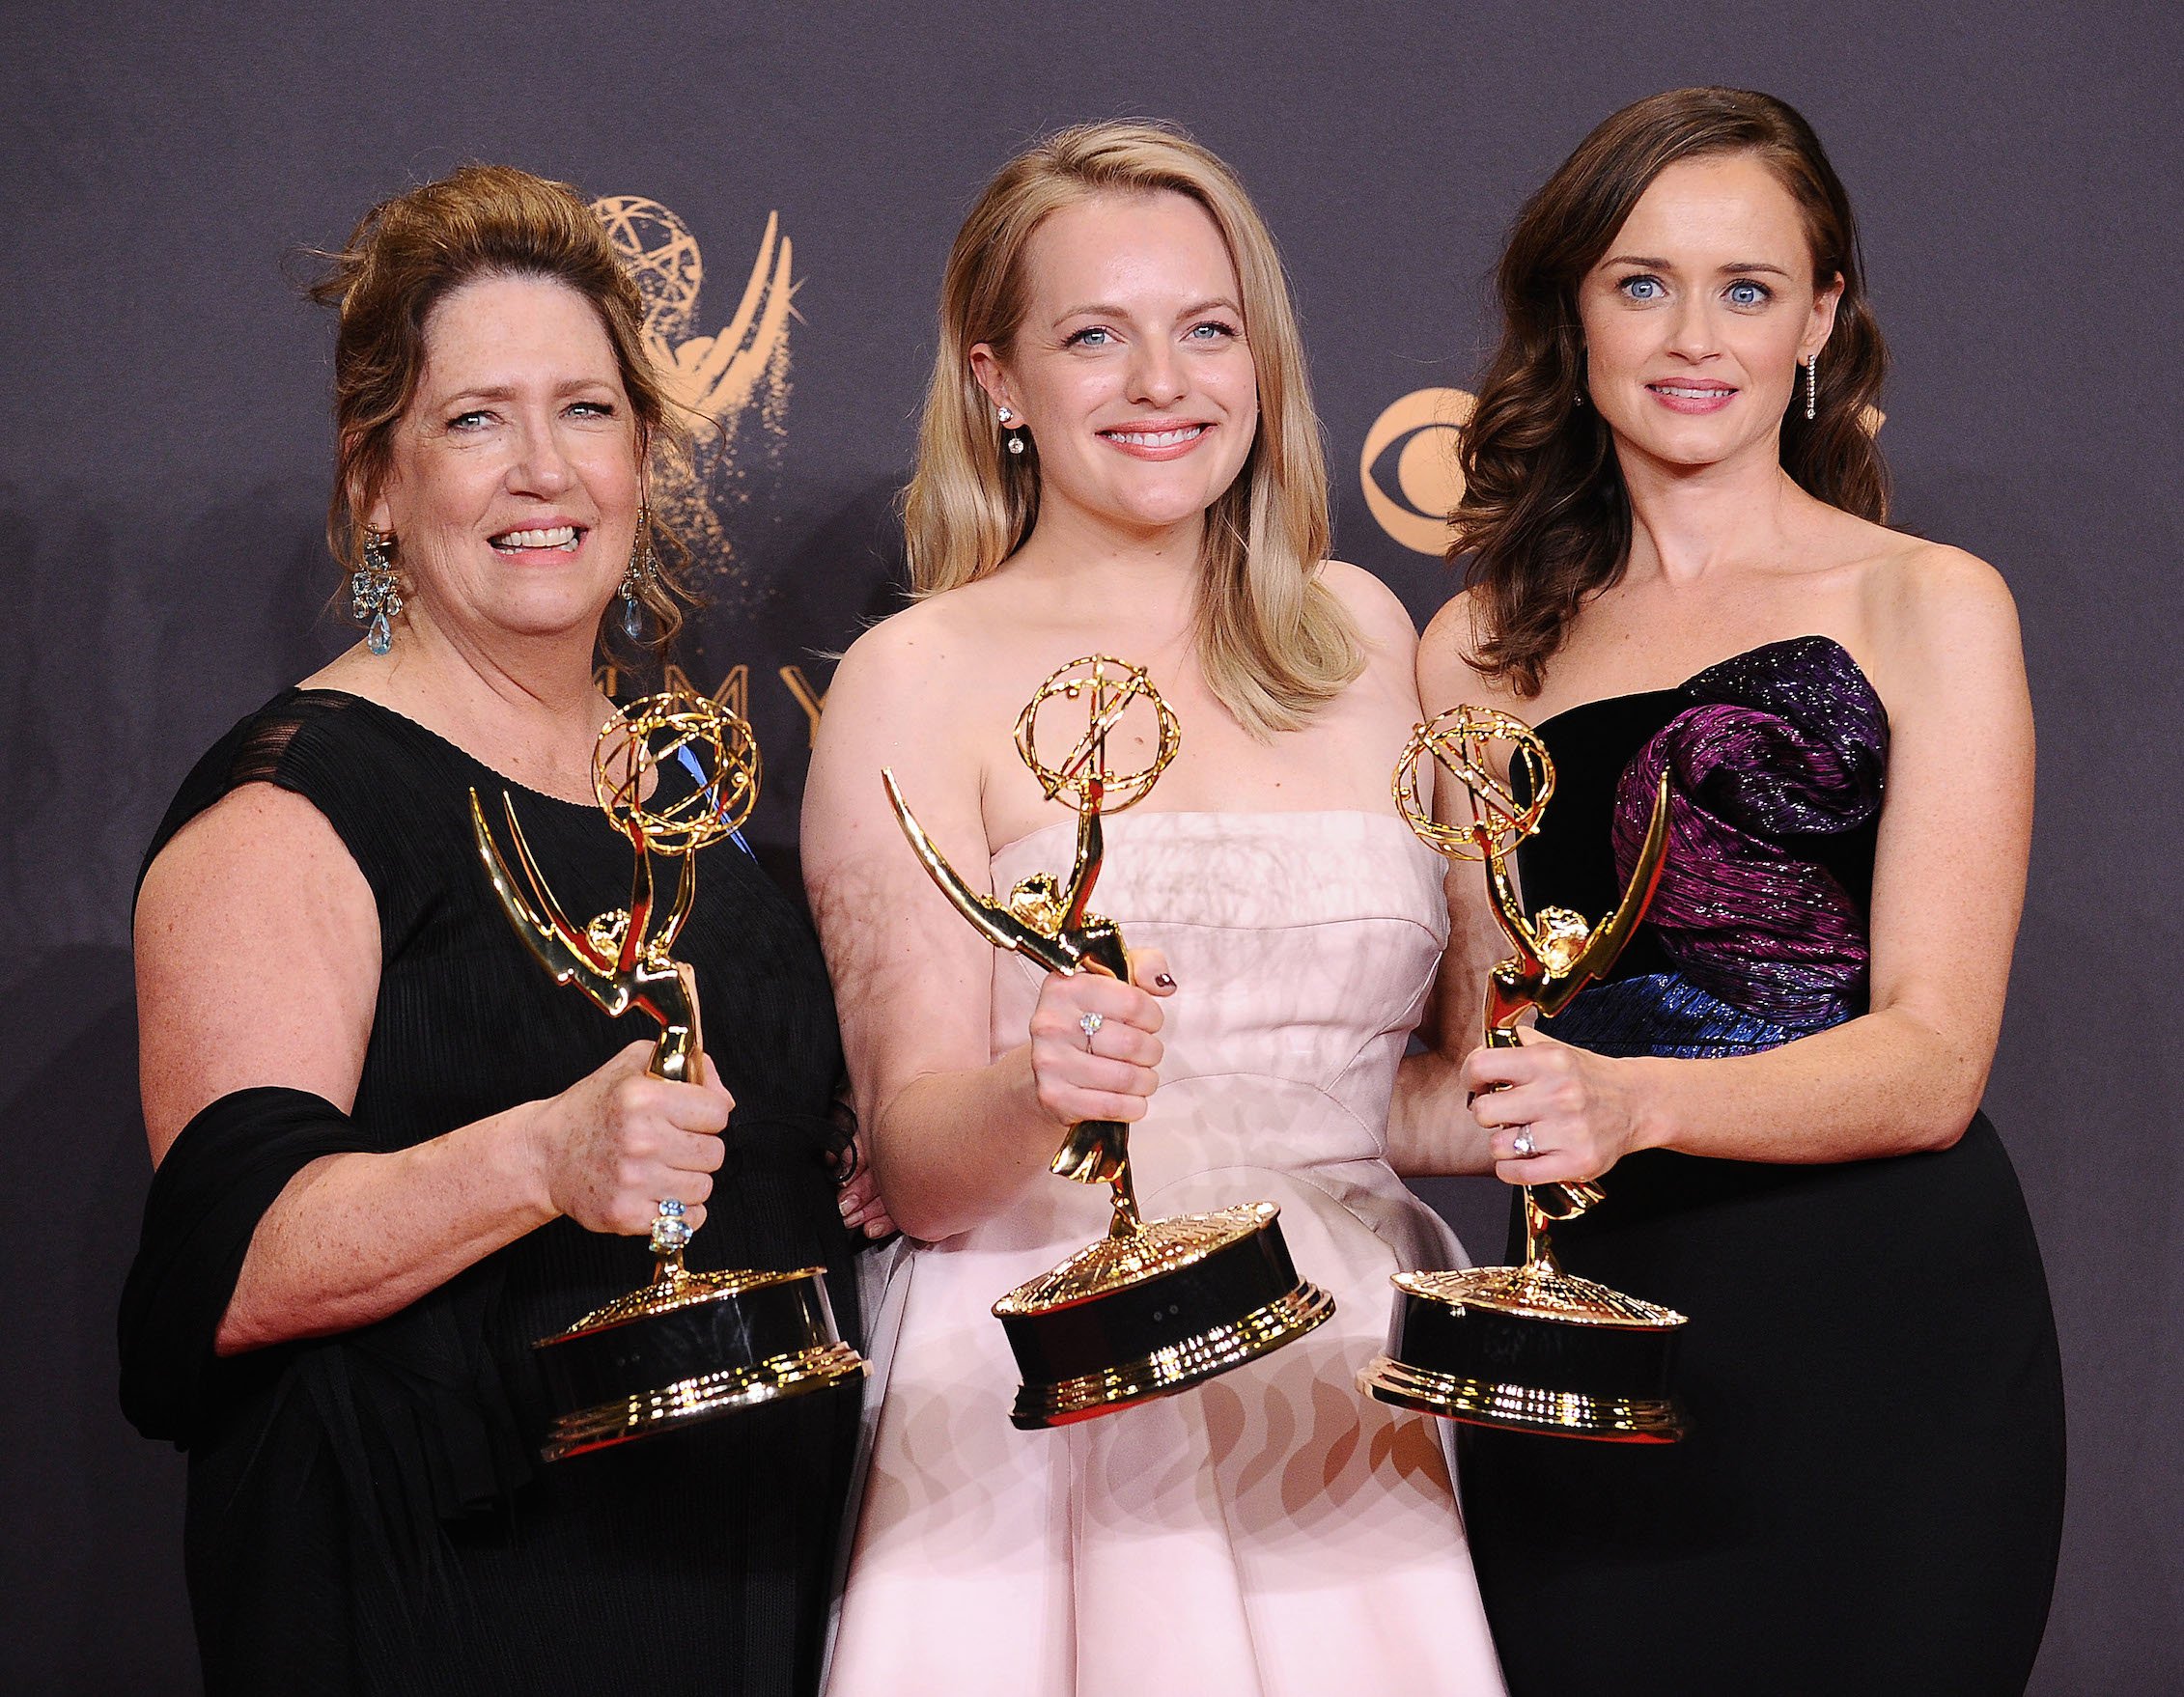 'The Handmaid's Tale' cast -- Ann Dowd, Elisabeth Moss, and Alexis Bledel, holding their awards and smiling after winning Outstanding Drama Series 